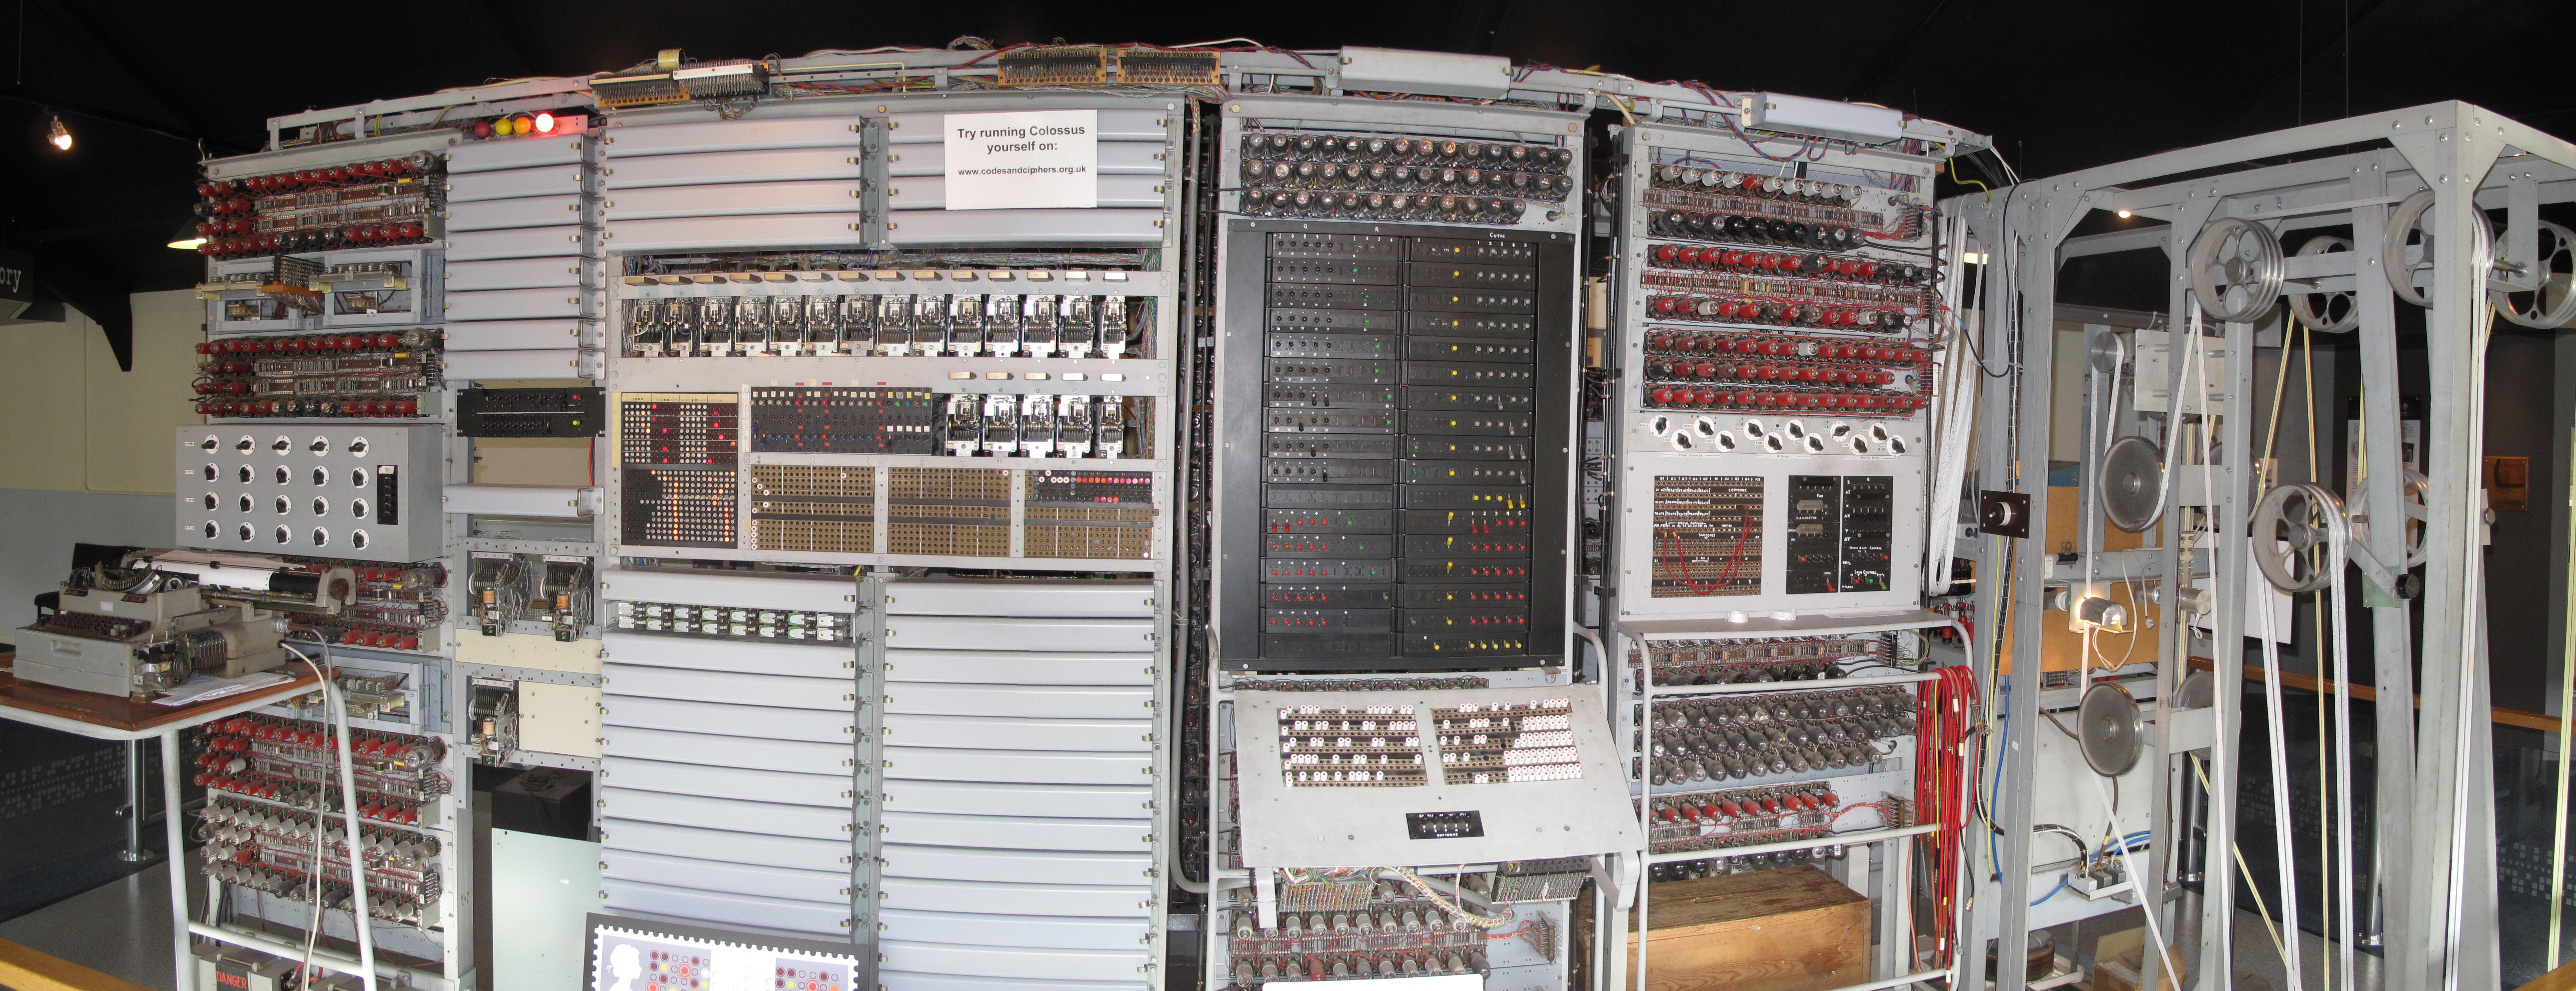 Frontal_view_of_the_reconstructed_Colossus_at_The_National_Museum_of_Computing%2C_Bletchley_Park.jpg